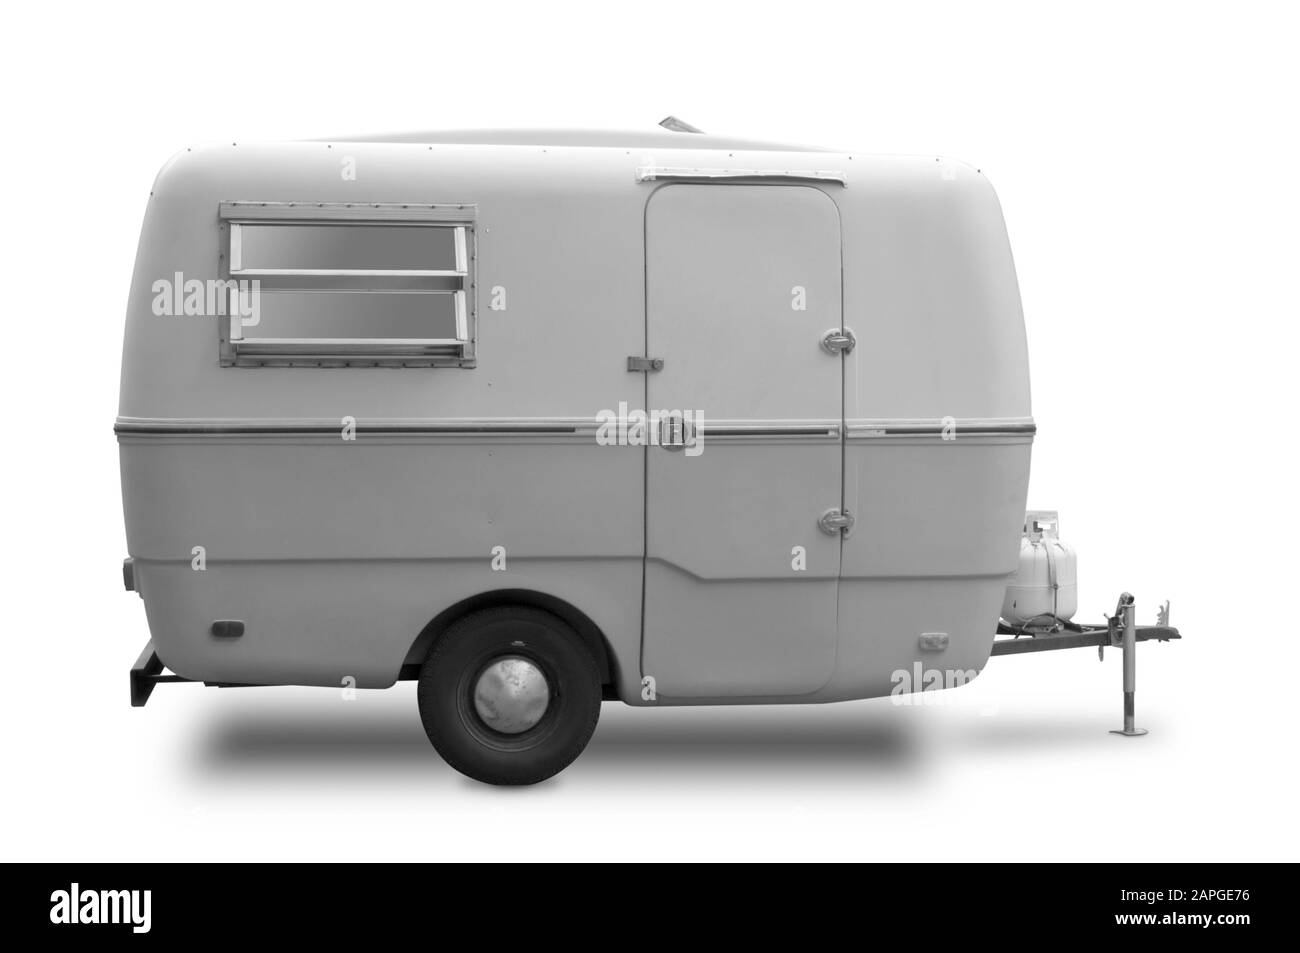 Illustration of a grey mini RV trailer under the lights against a white background Stock Photo